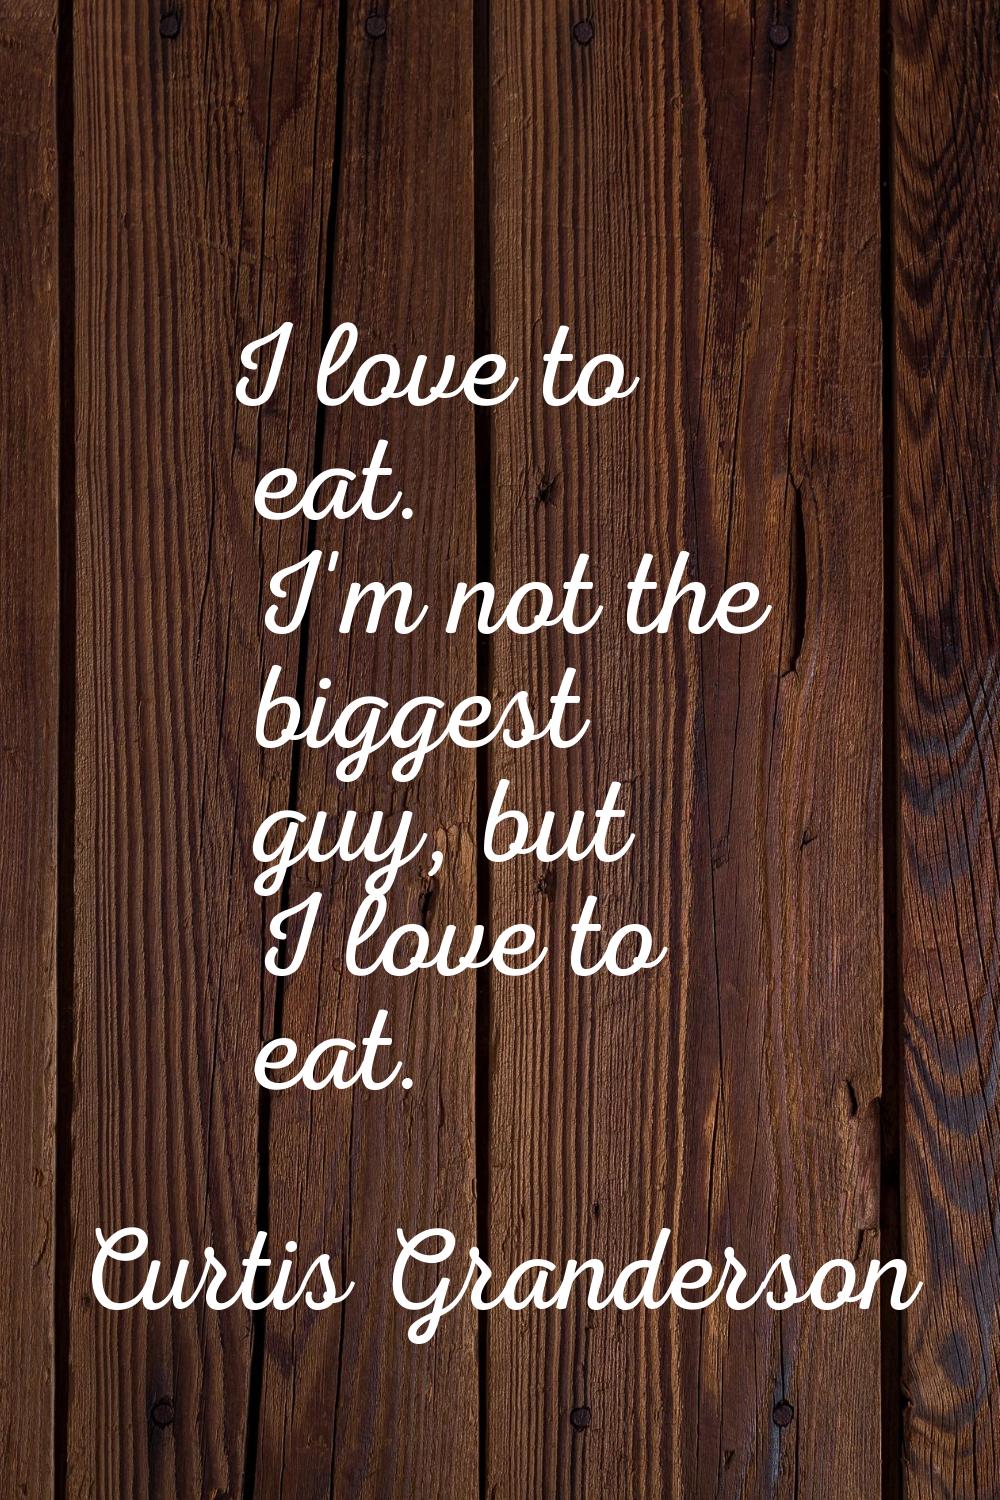 I love to eat. I'm not the biggest guy, but I love to eat.